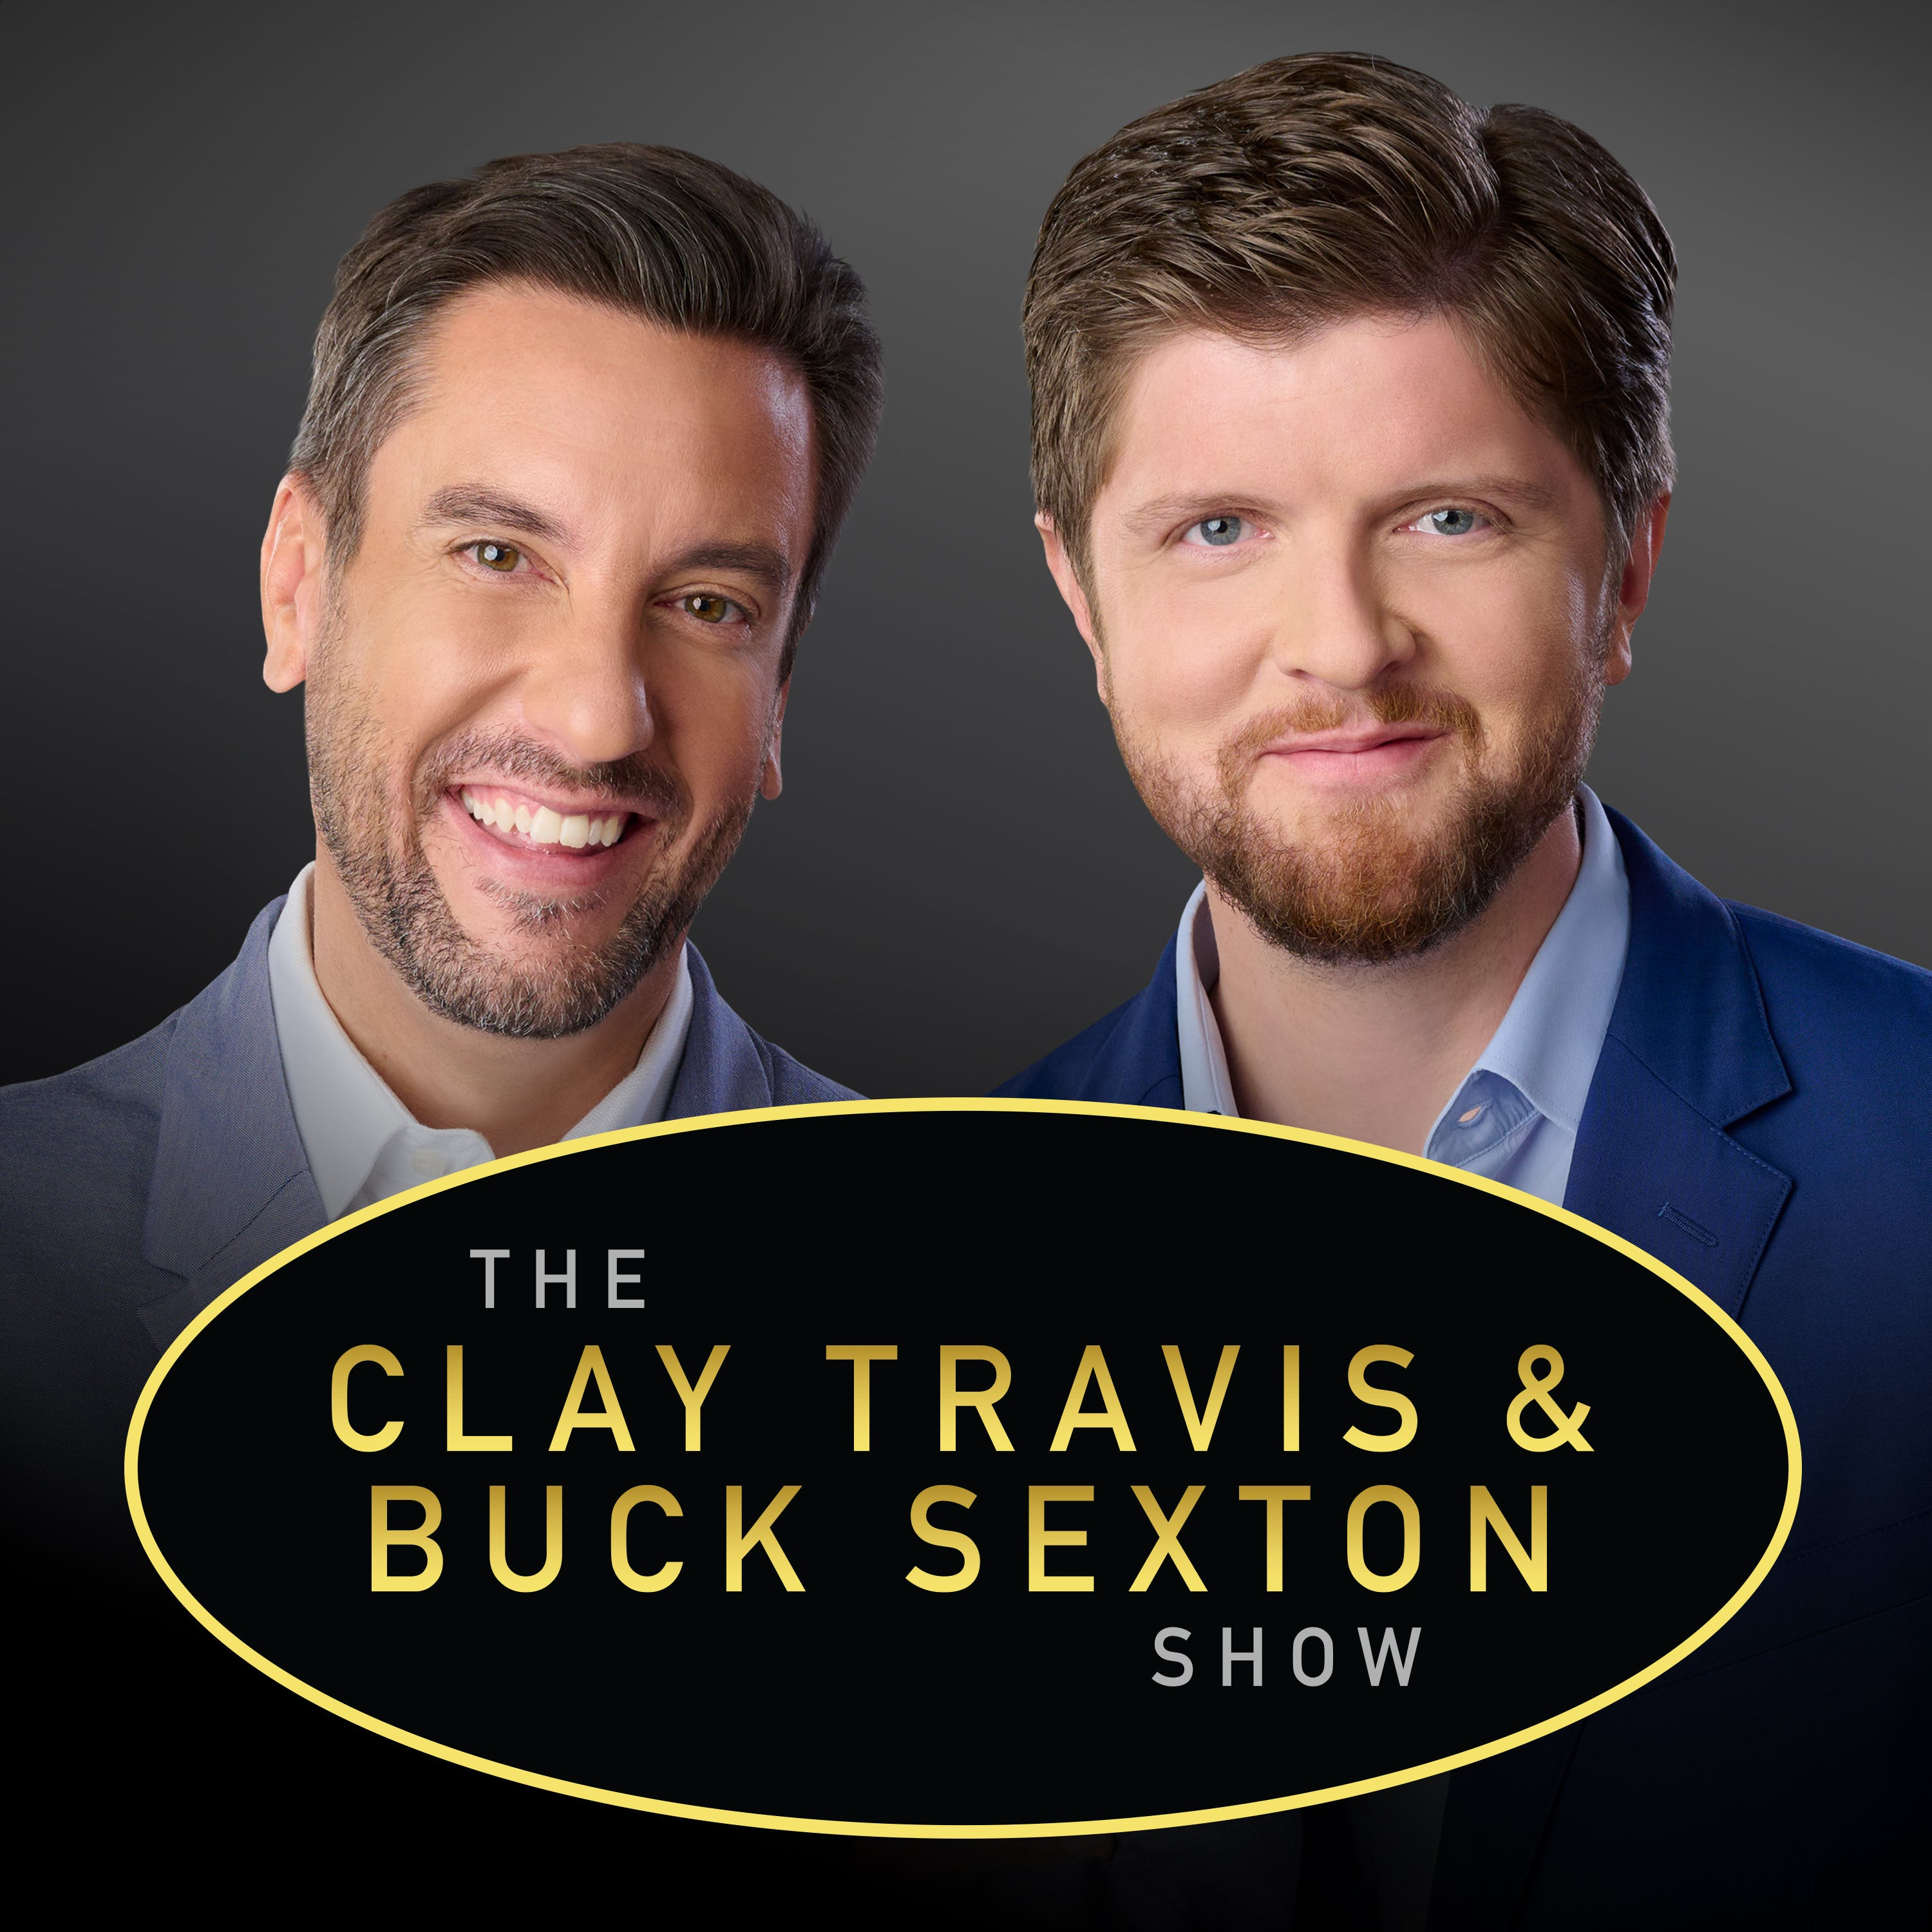 Clay Travis and Buck Sexton Show H1 – Sep 16 2021